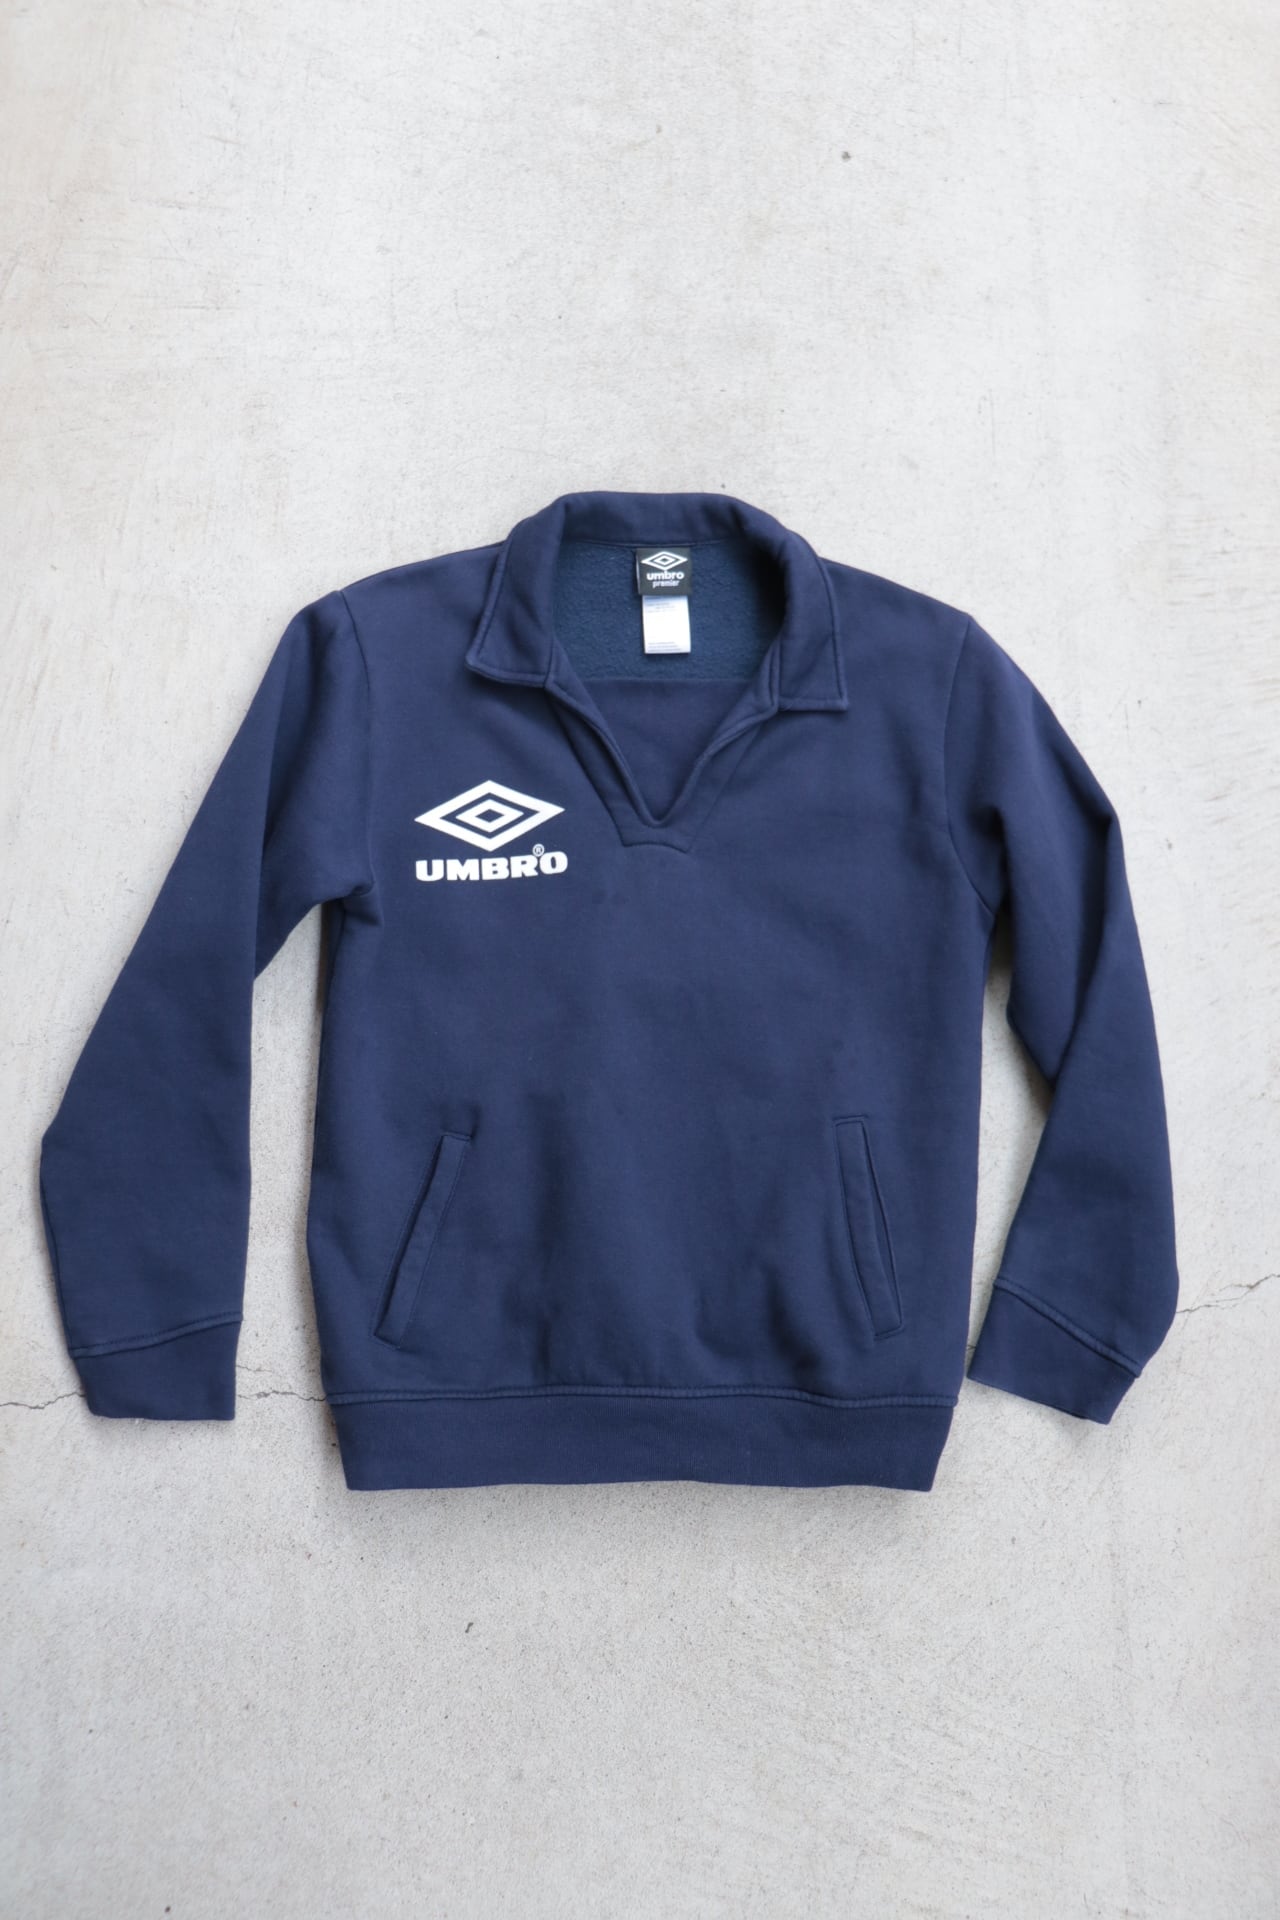 Vintage umbro collar sweater | Cary